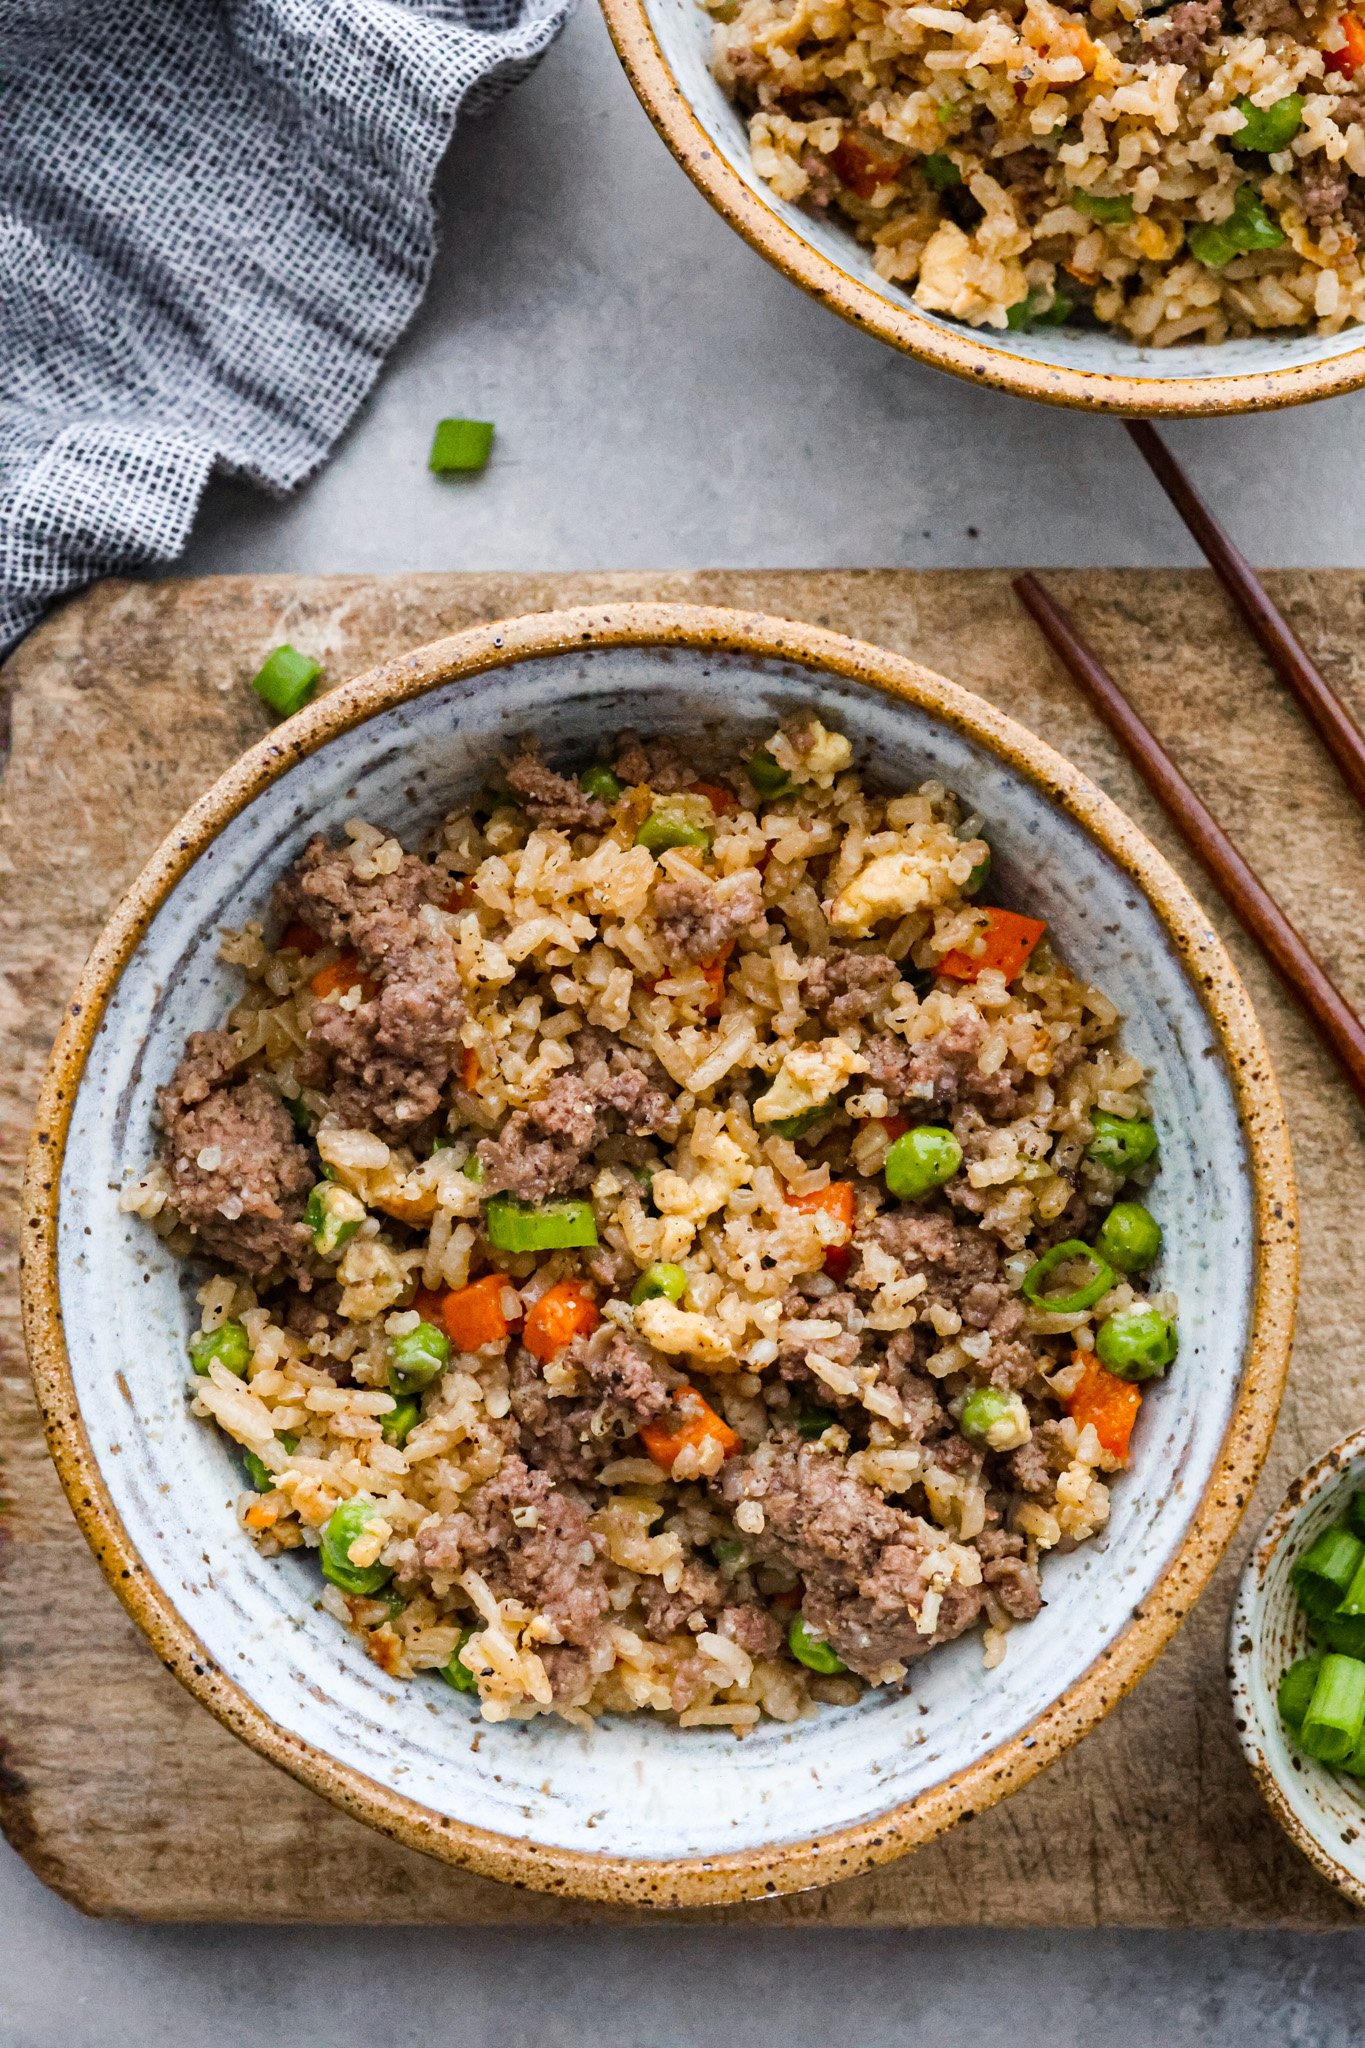 Fried Rice from Leftover Rice - Oh, That's Good